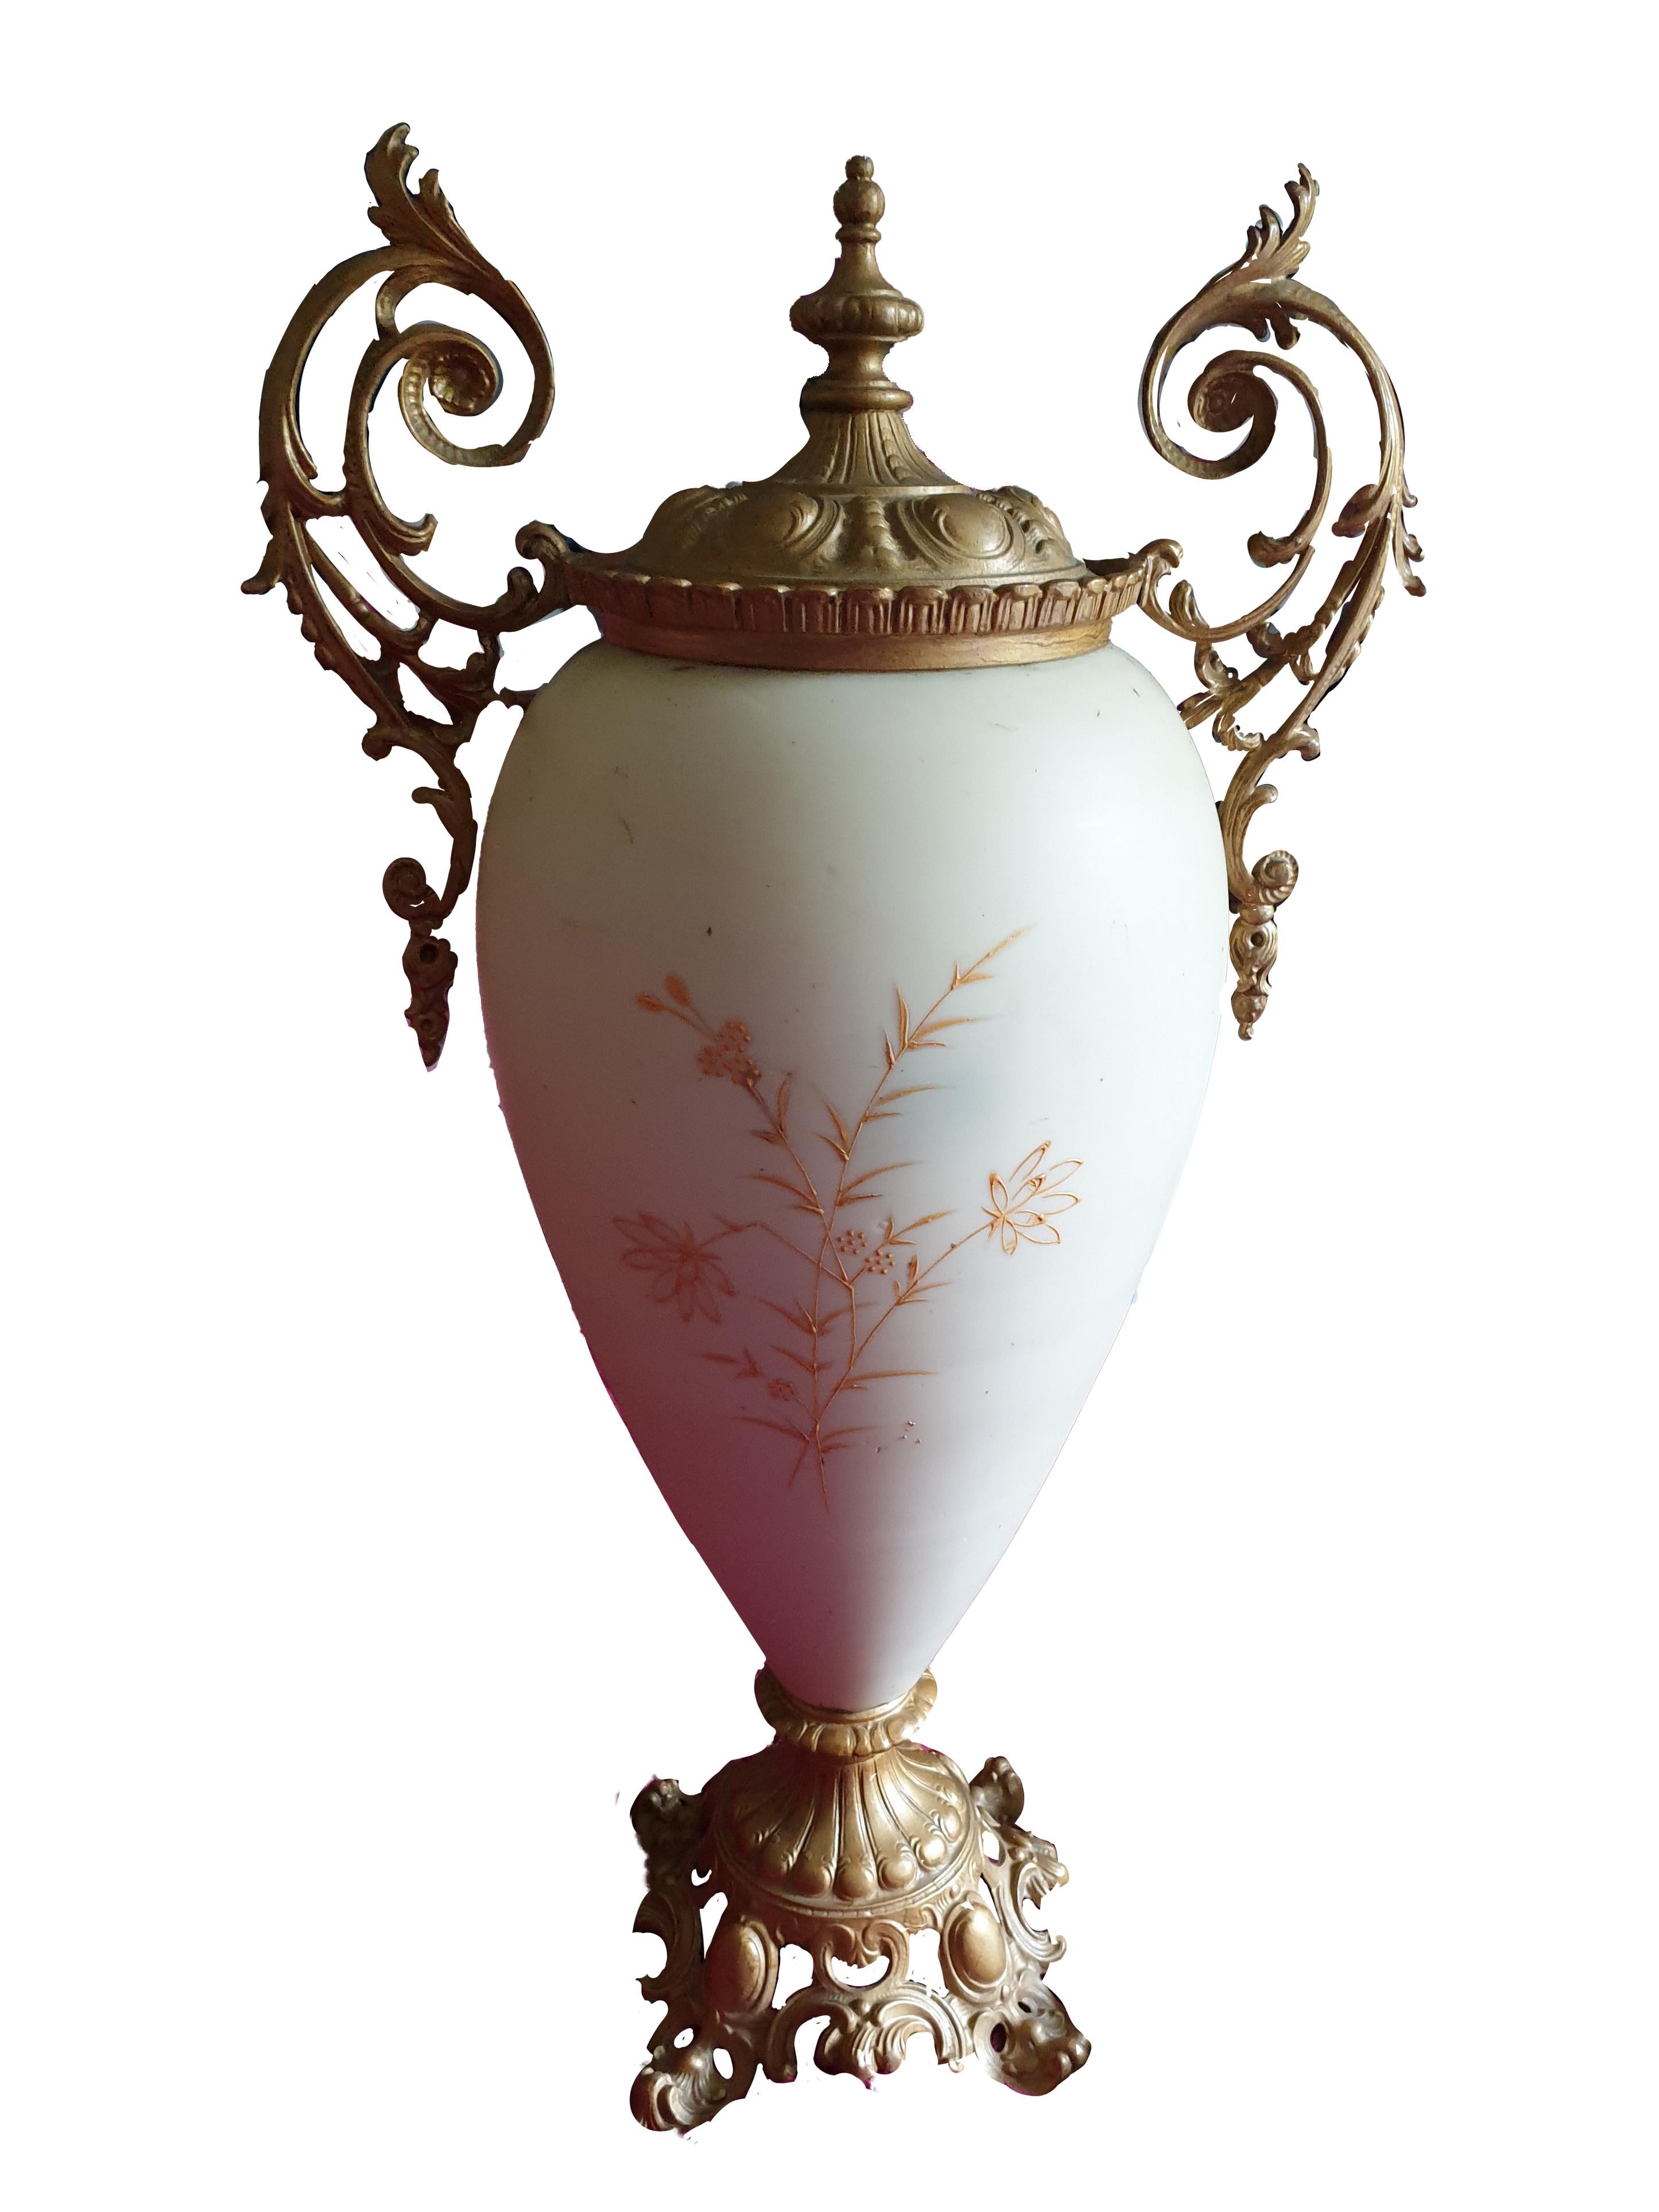 A large lidded Opaline decorative two handled vase in ovoid form with raised gilt floral paintings of pastel colour on both the front and back sides. Dating from mid 19th century and bulbous from the neck down it continuously tapers to the base. The